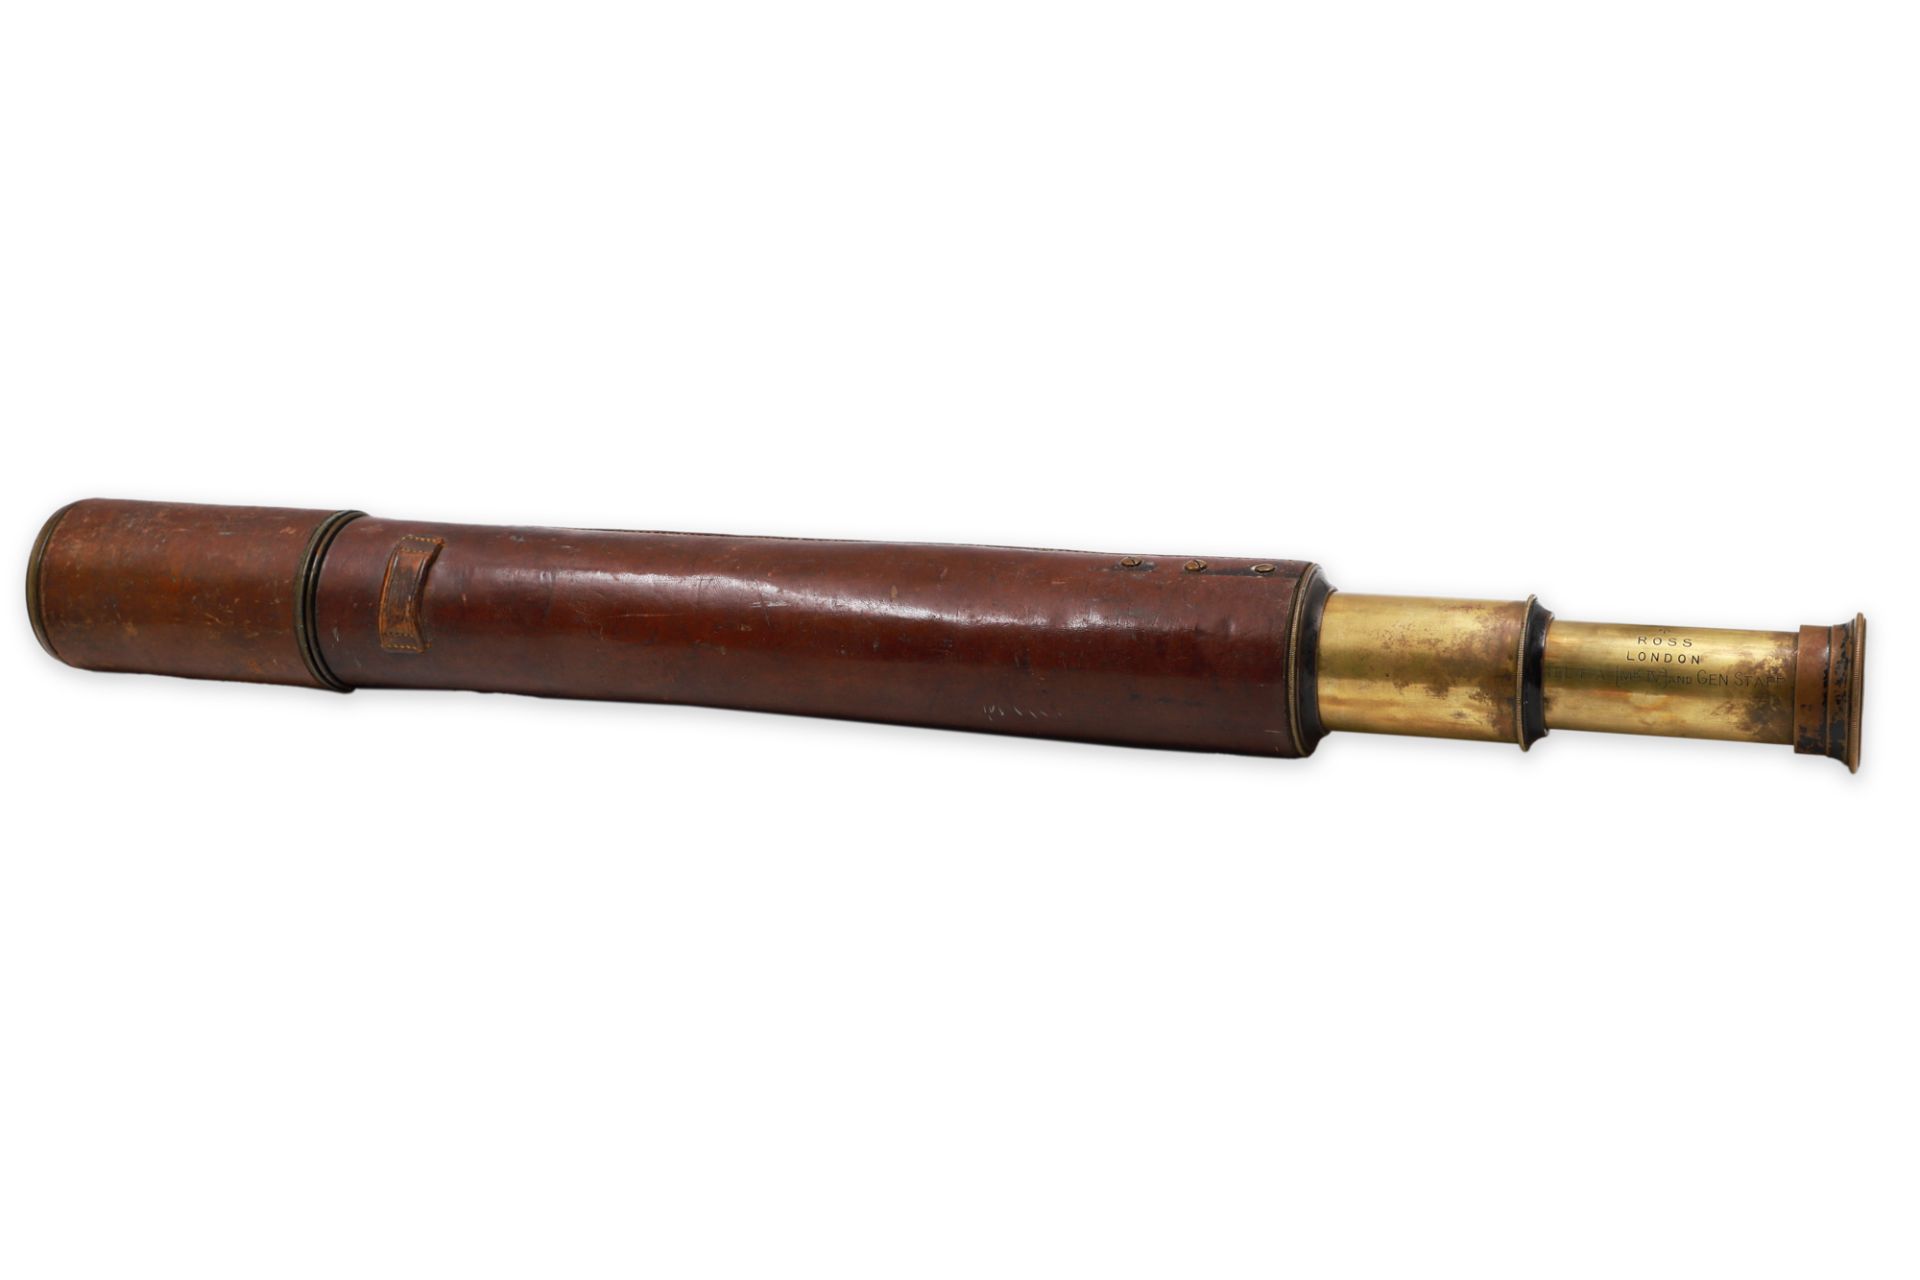 AN EARLY 20TH CENTURY ROSS (LONDON) MILITARY TELESCOPE, leather-bound, brass stamped, "Ross London